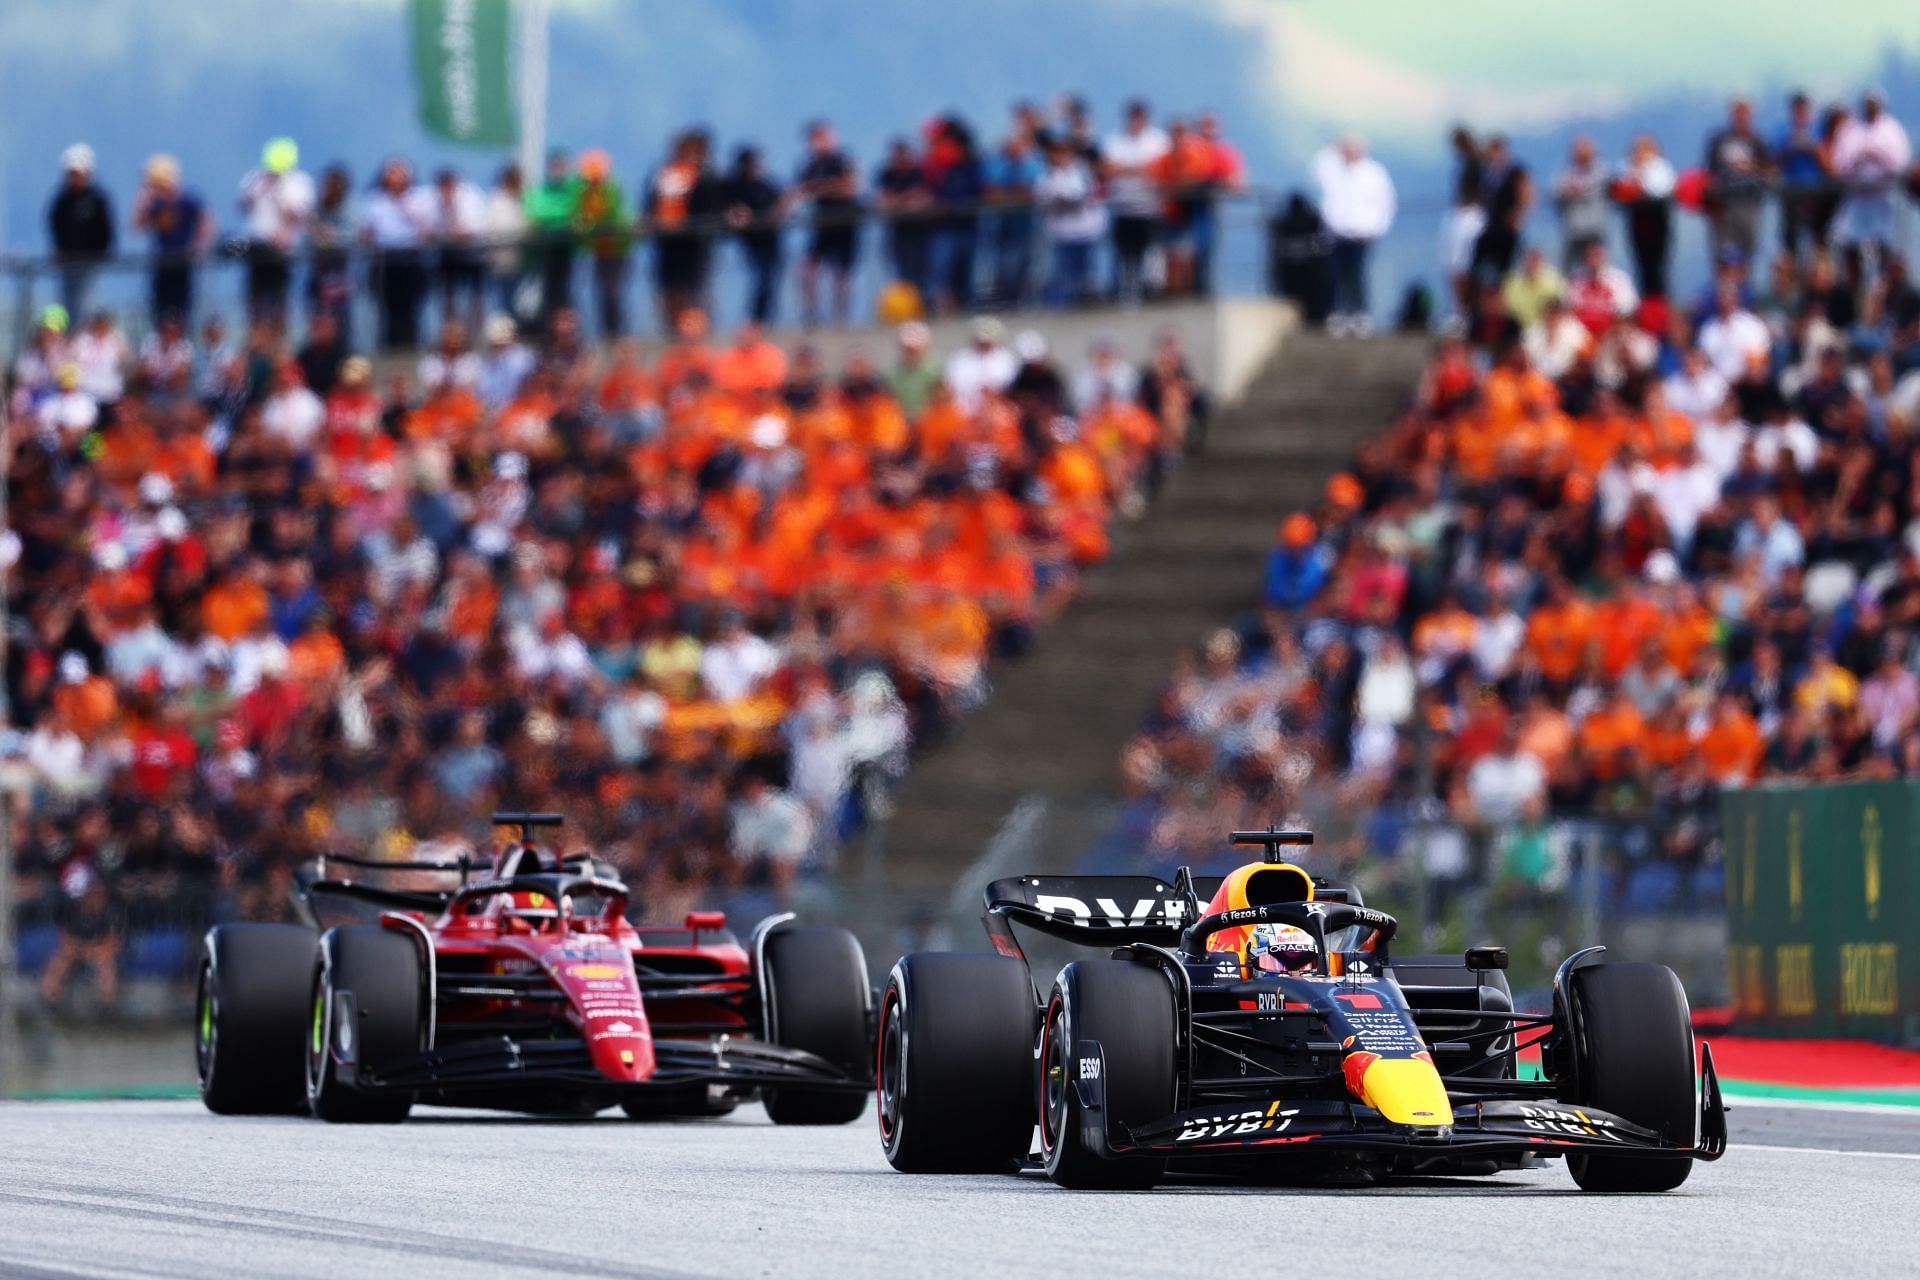 Ferrari driver Charles Leclerc (background) and Red Bull driver Max Verstappen (foreground) in action during the 2022 F1 Austrian GP. (Photo by Clive Rose/Getty Images)